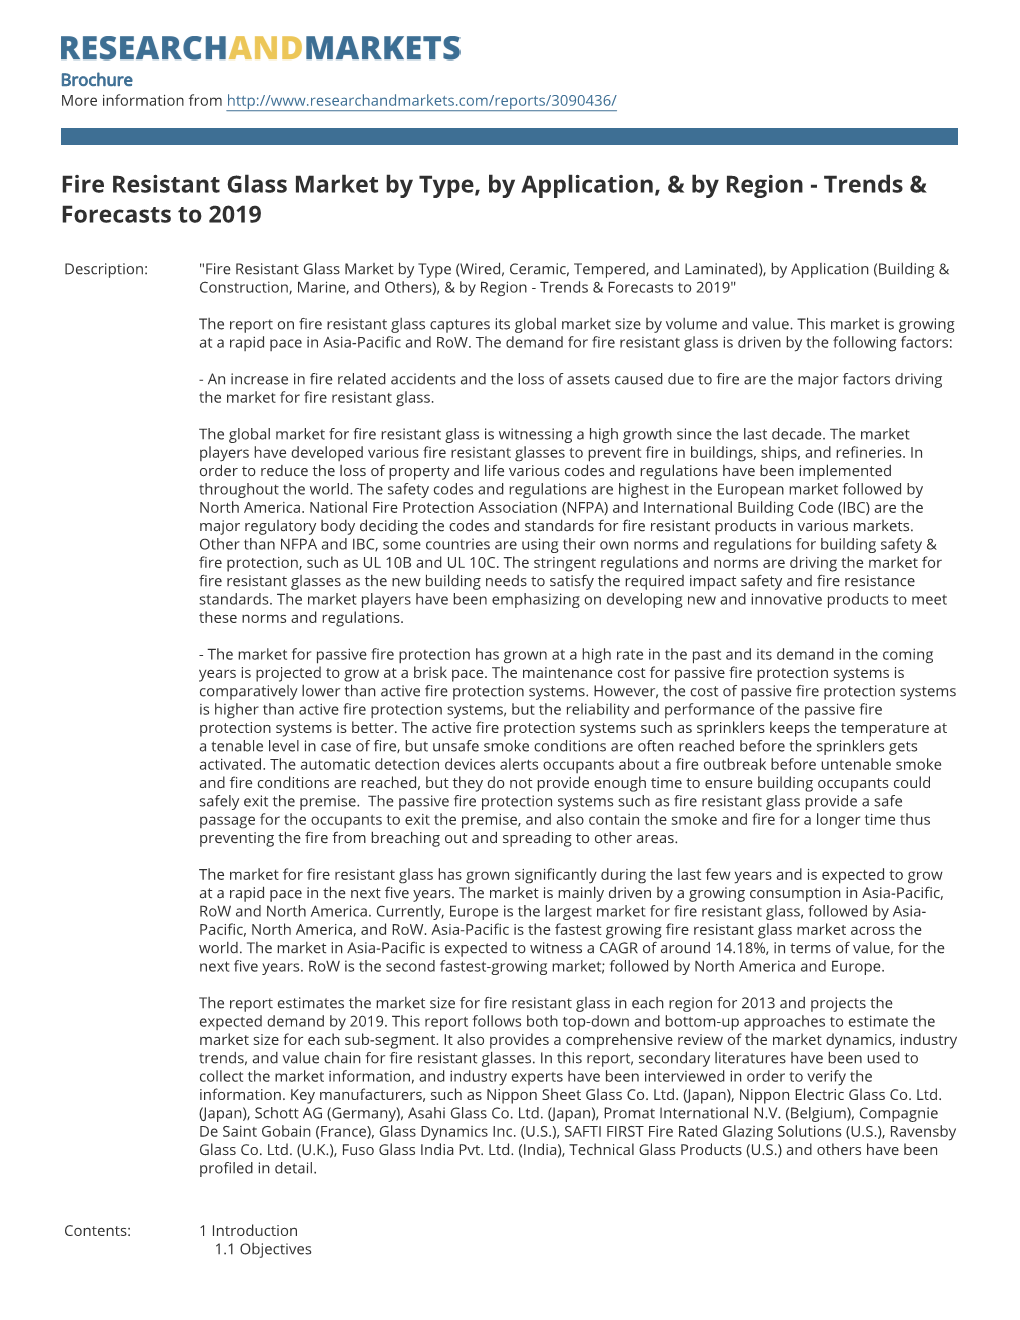 Fire Resistant Glass Market by Type, by Application, & by Region